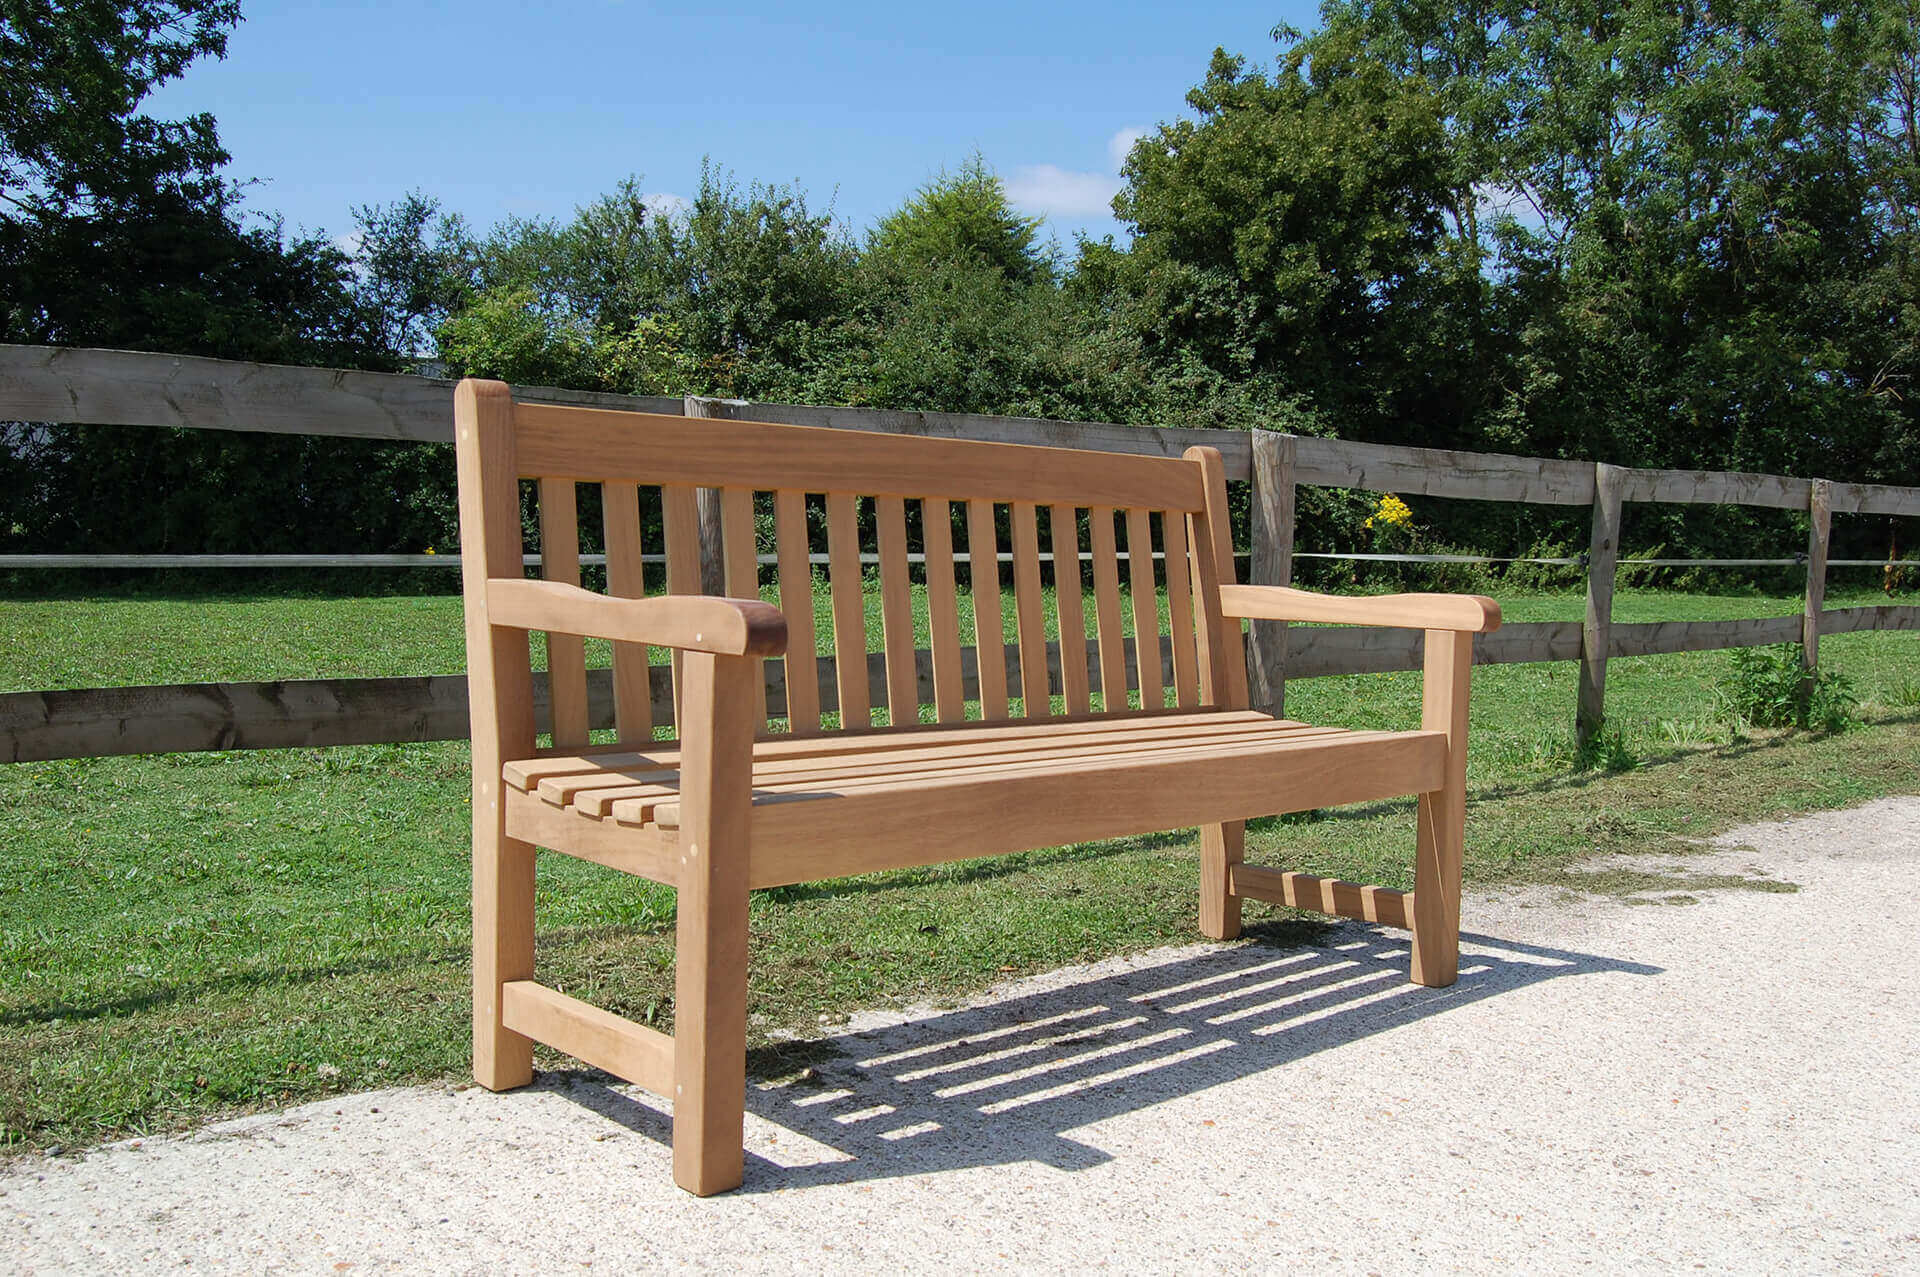 Top 5 tips for the renovation of a neglected garden bench